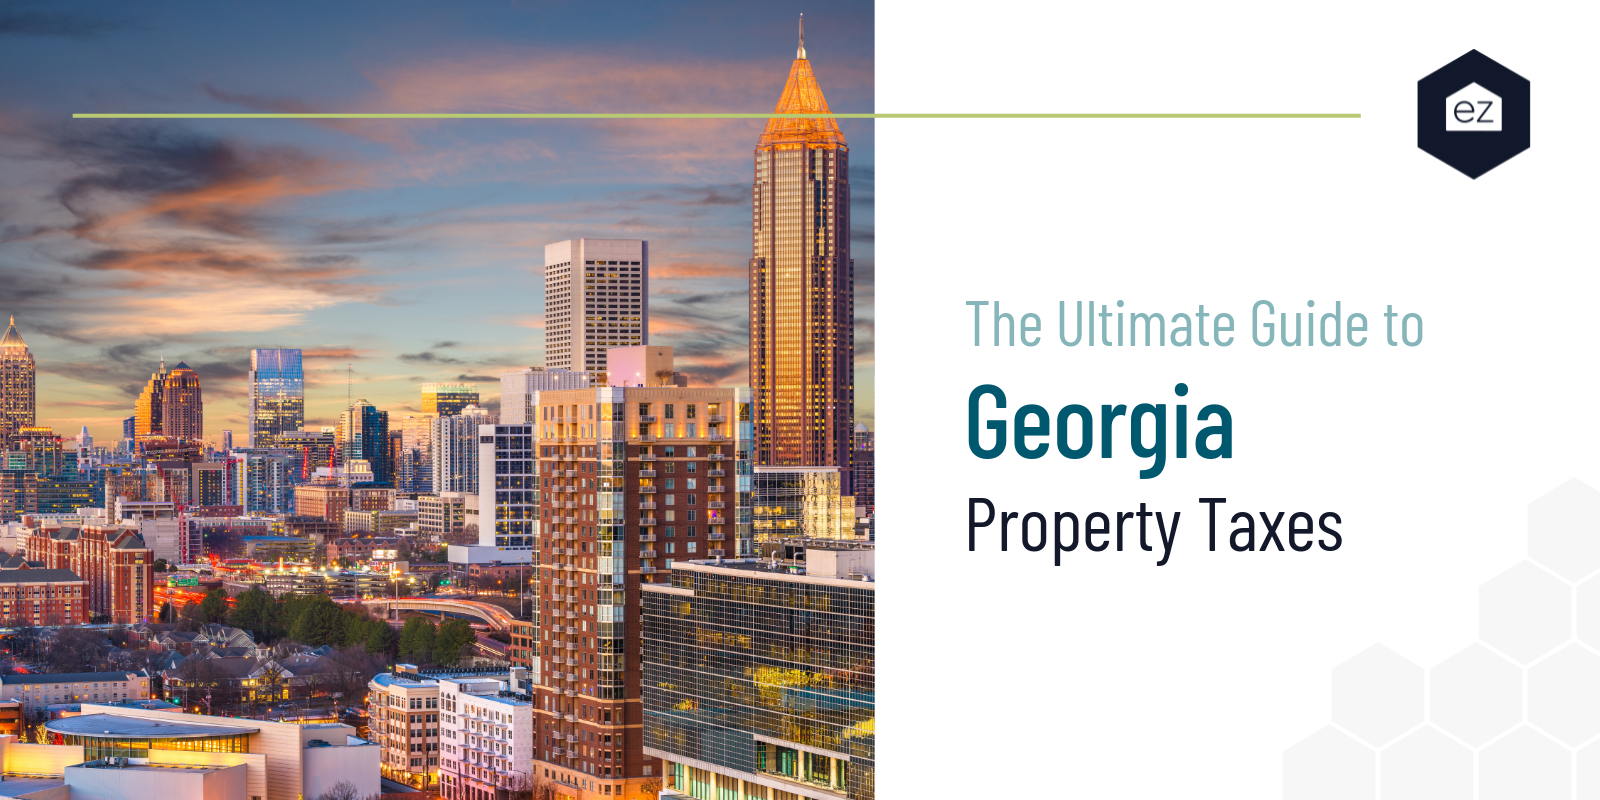 The Ultimate Guide to Property Tax Laws in